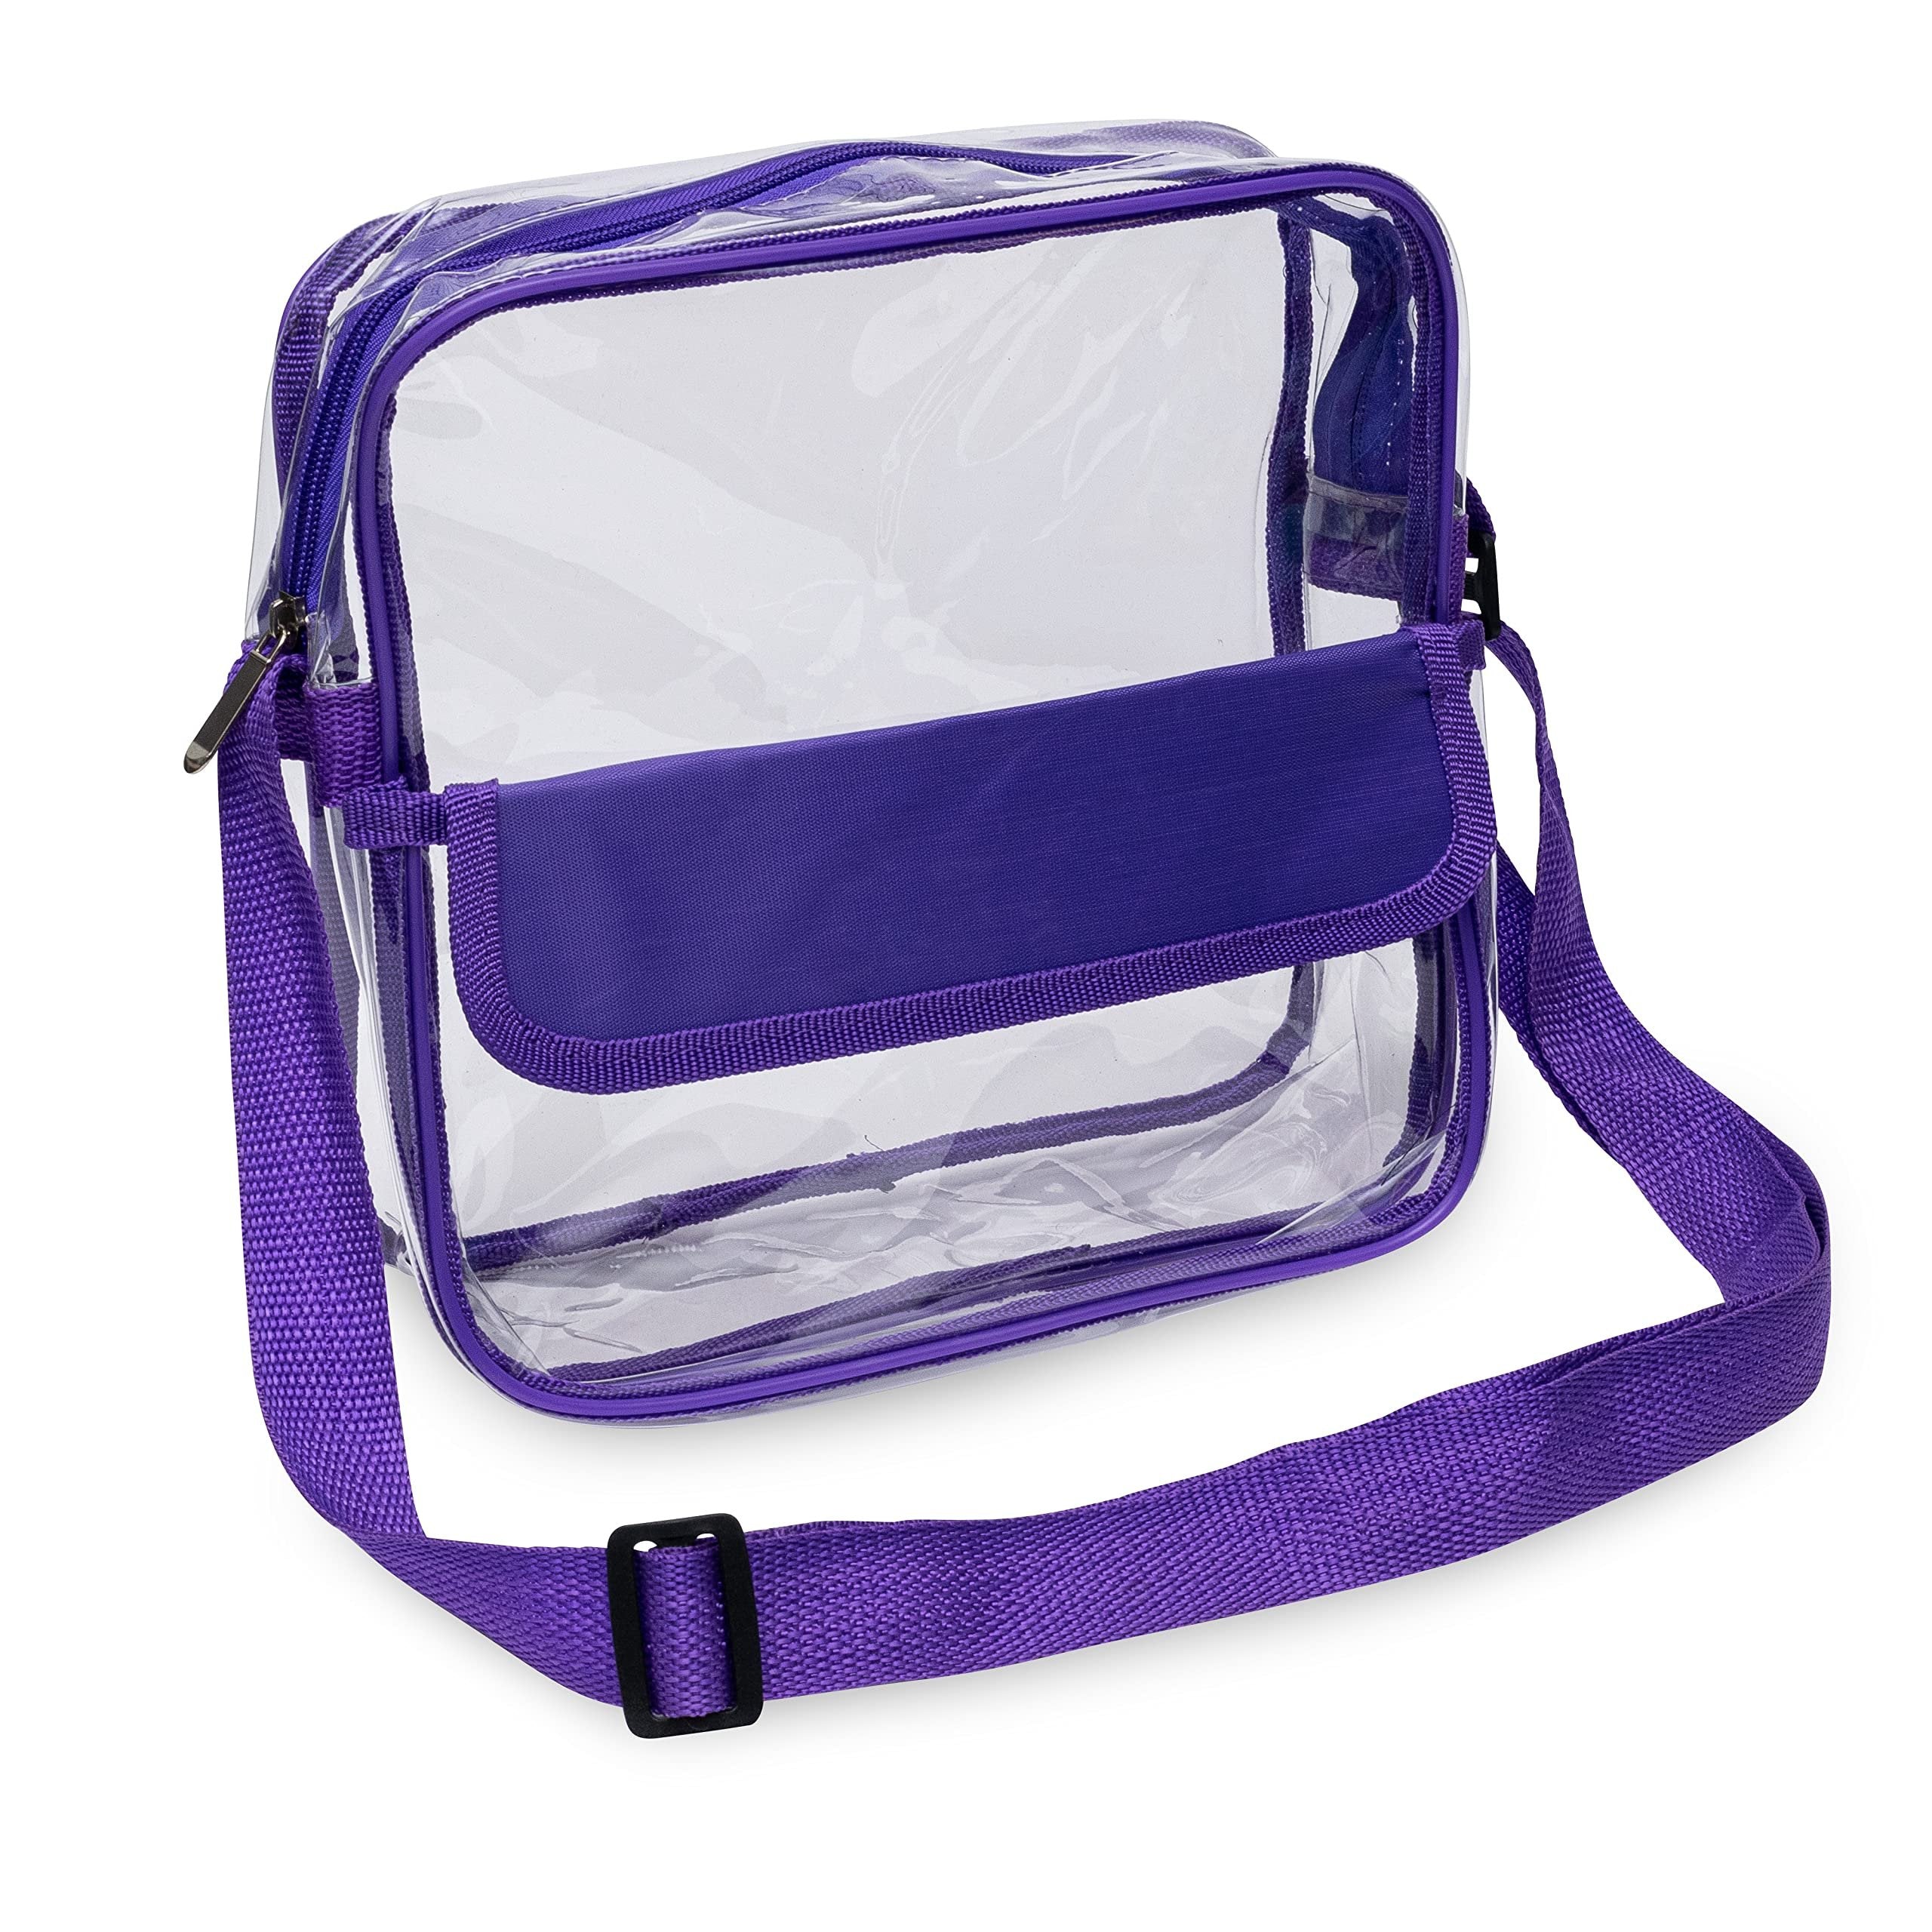 Clear Crossbody Purse - See-Through Vinyl Bag with Zipper, Front Pocket & Adjustable Strap, Purple, Size 10x10x4.5